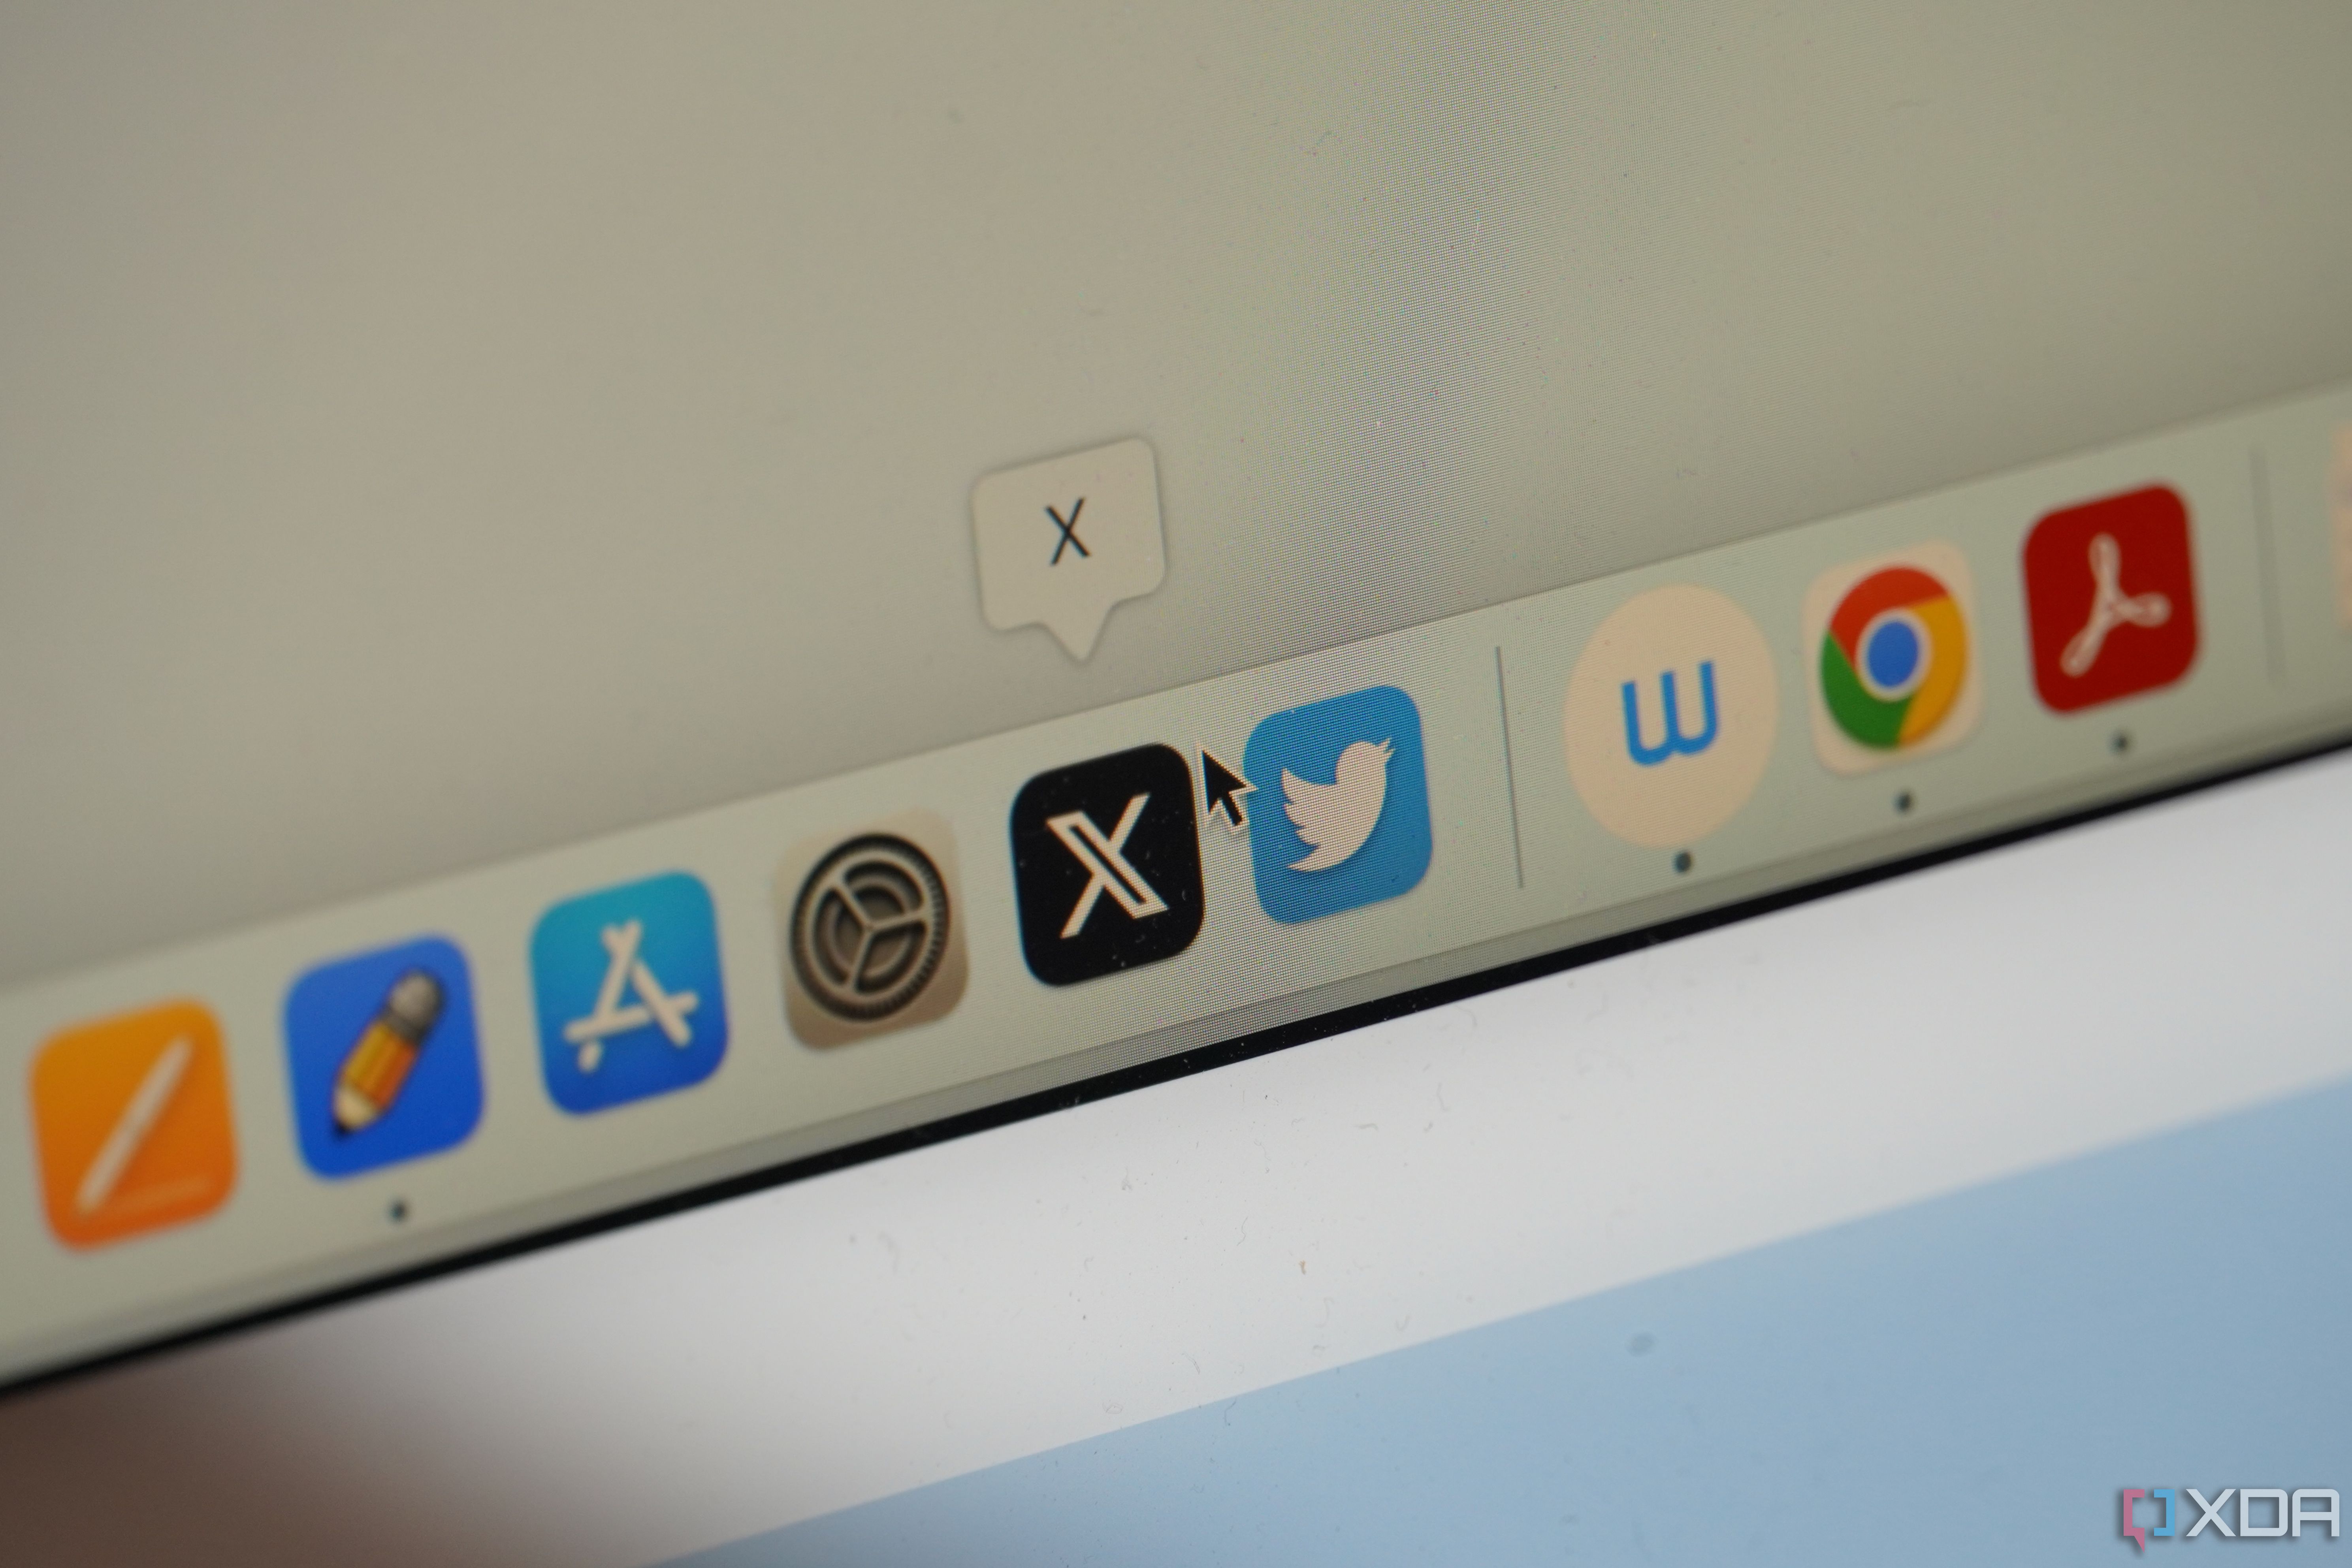 The Twitter and X icons in the macOS Dock.